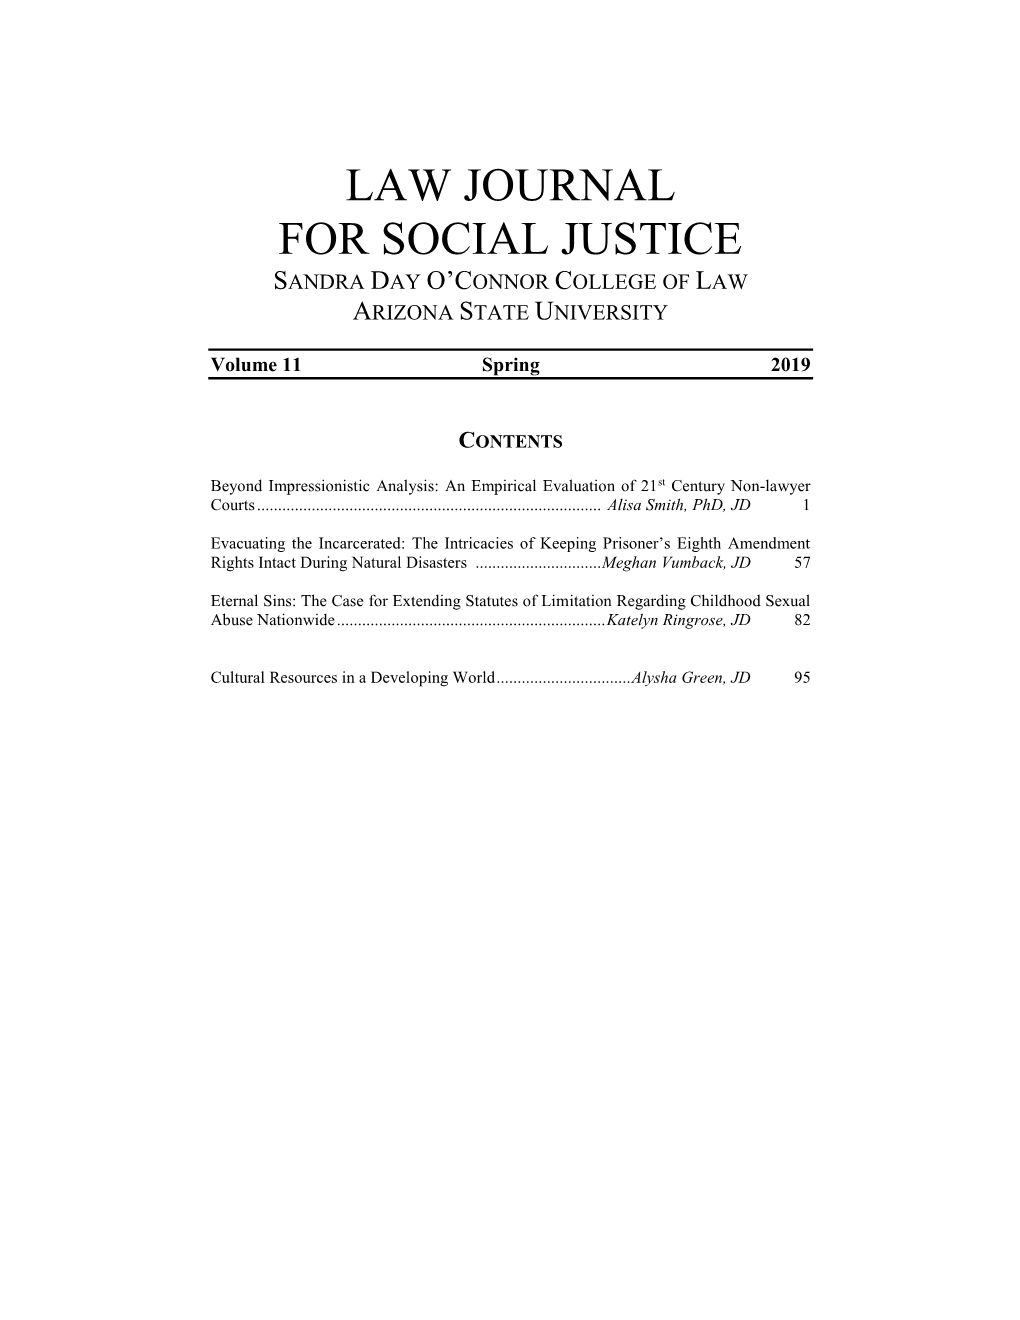 Law Journal for Social Justice Sandra Day O’Connor College of Law Arizona State University